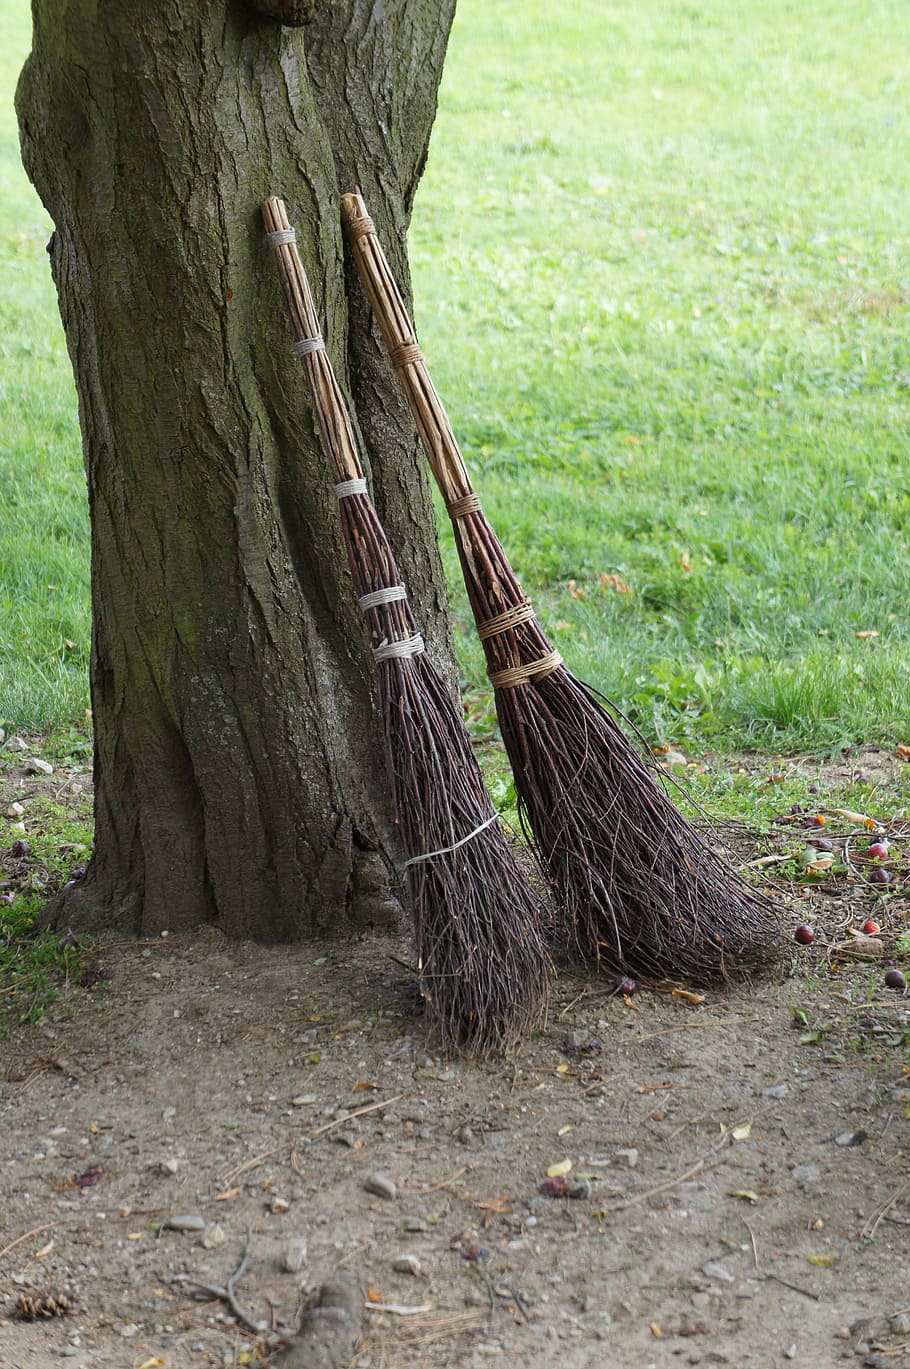 brooms, tree, grass, nature, outdoors, plant, tree trunk, trunk, land, day